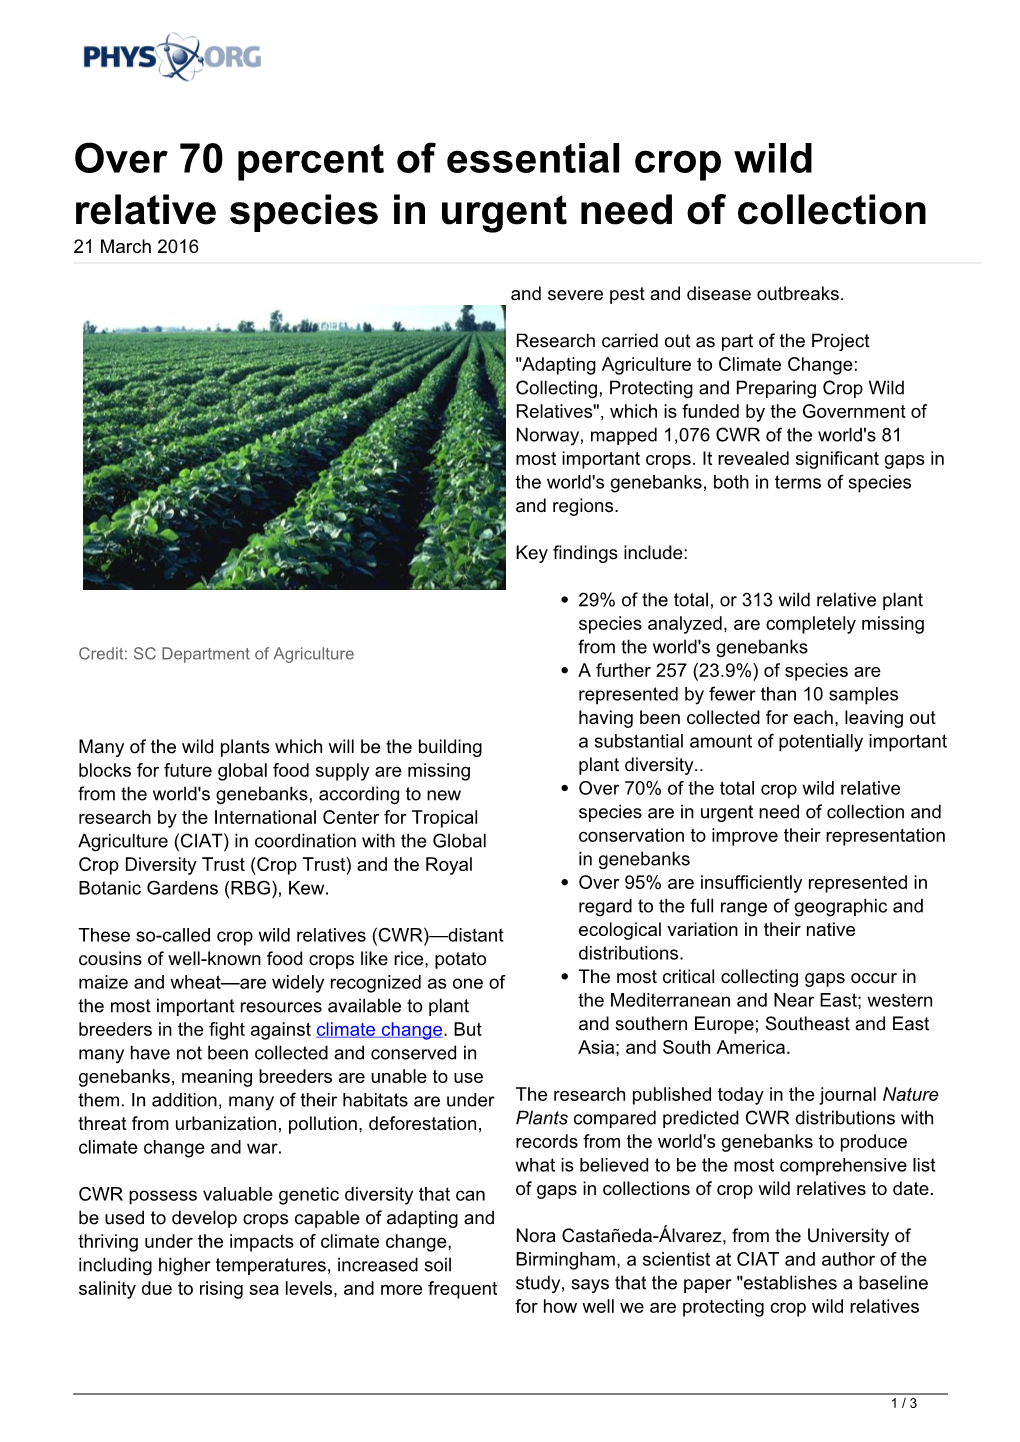 Over 70 Percent of Essential Crop Wild Relative Species in Urgent Need of Collection 21 March 2016